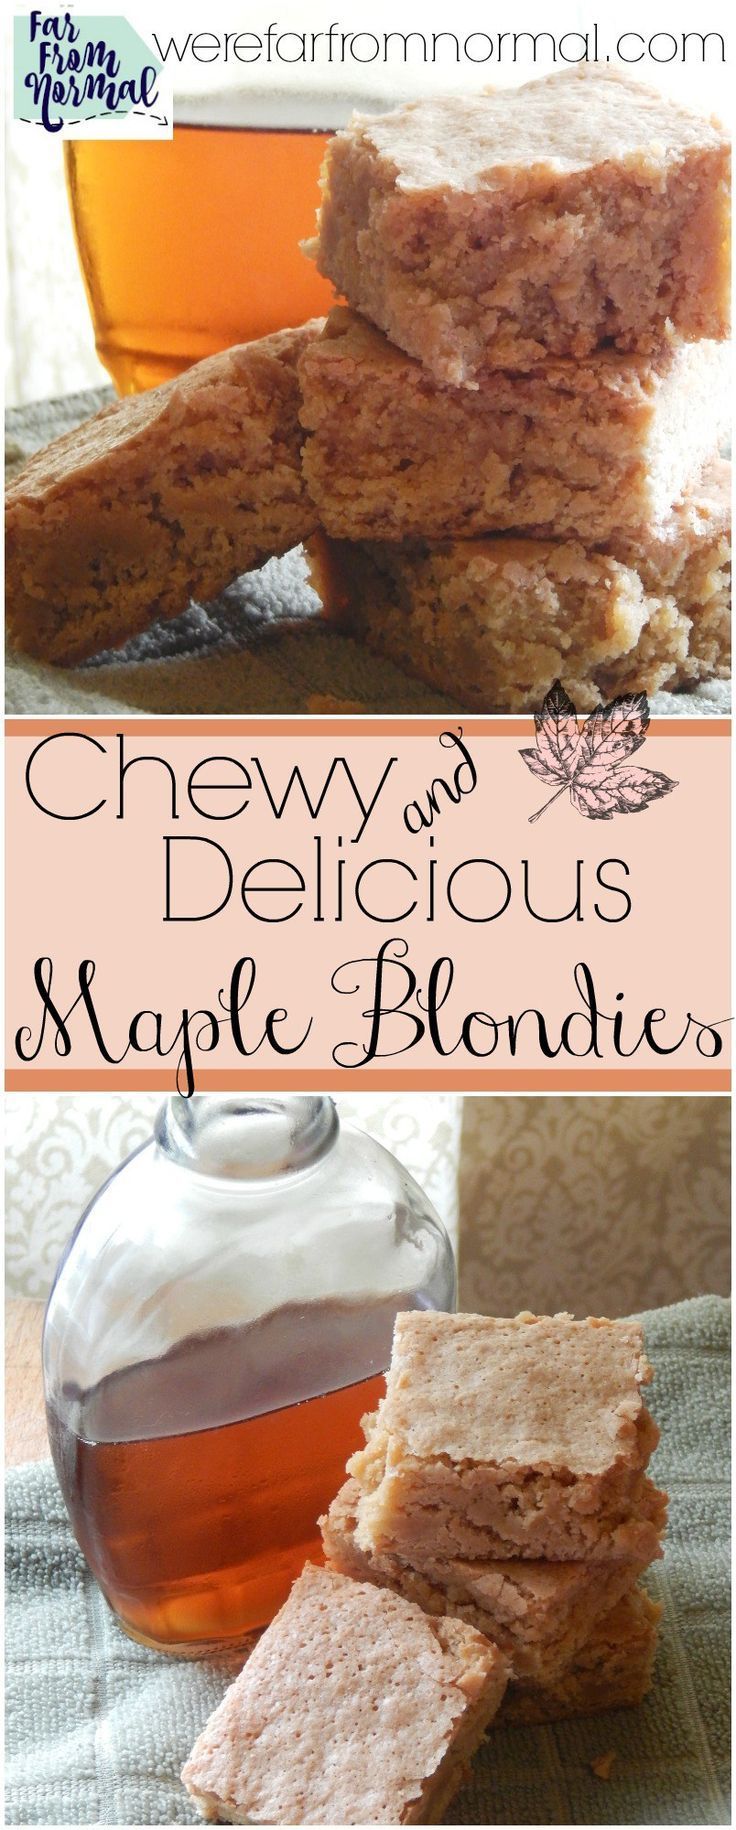 Maple Blondies Chewy & Delicous - Far From Normal -   17 desserts No Bake maple syrup ideas